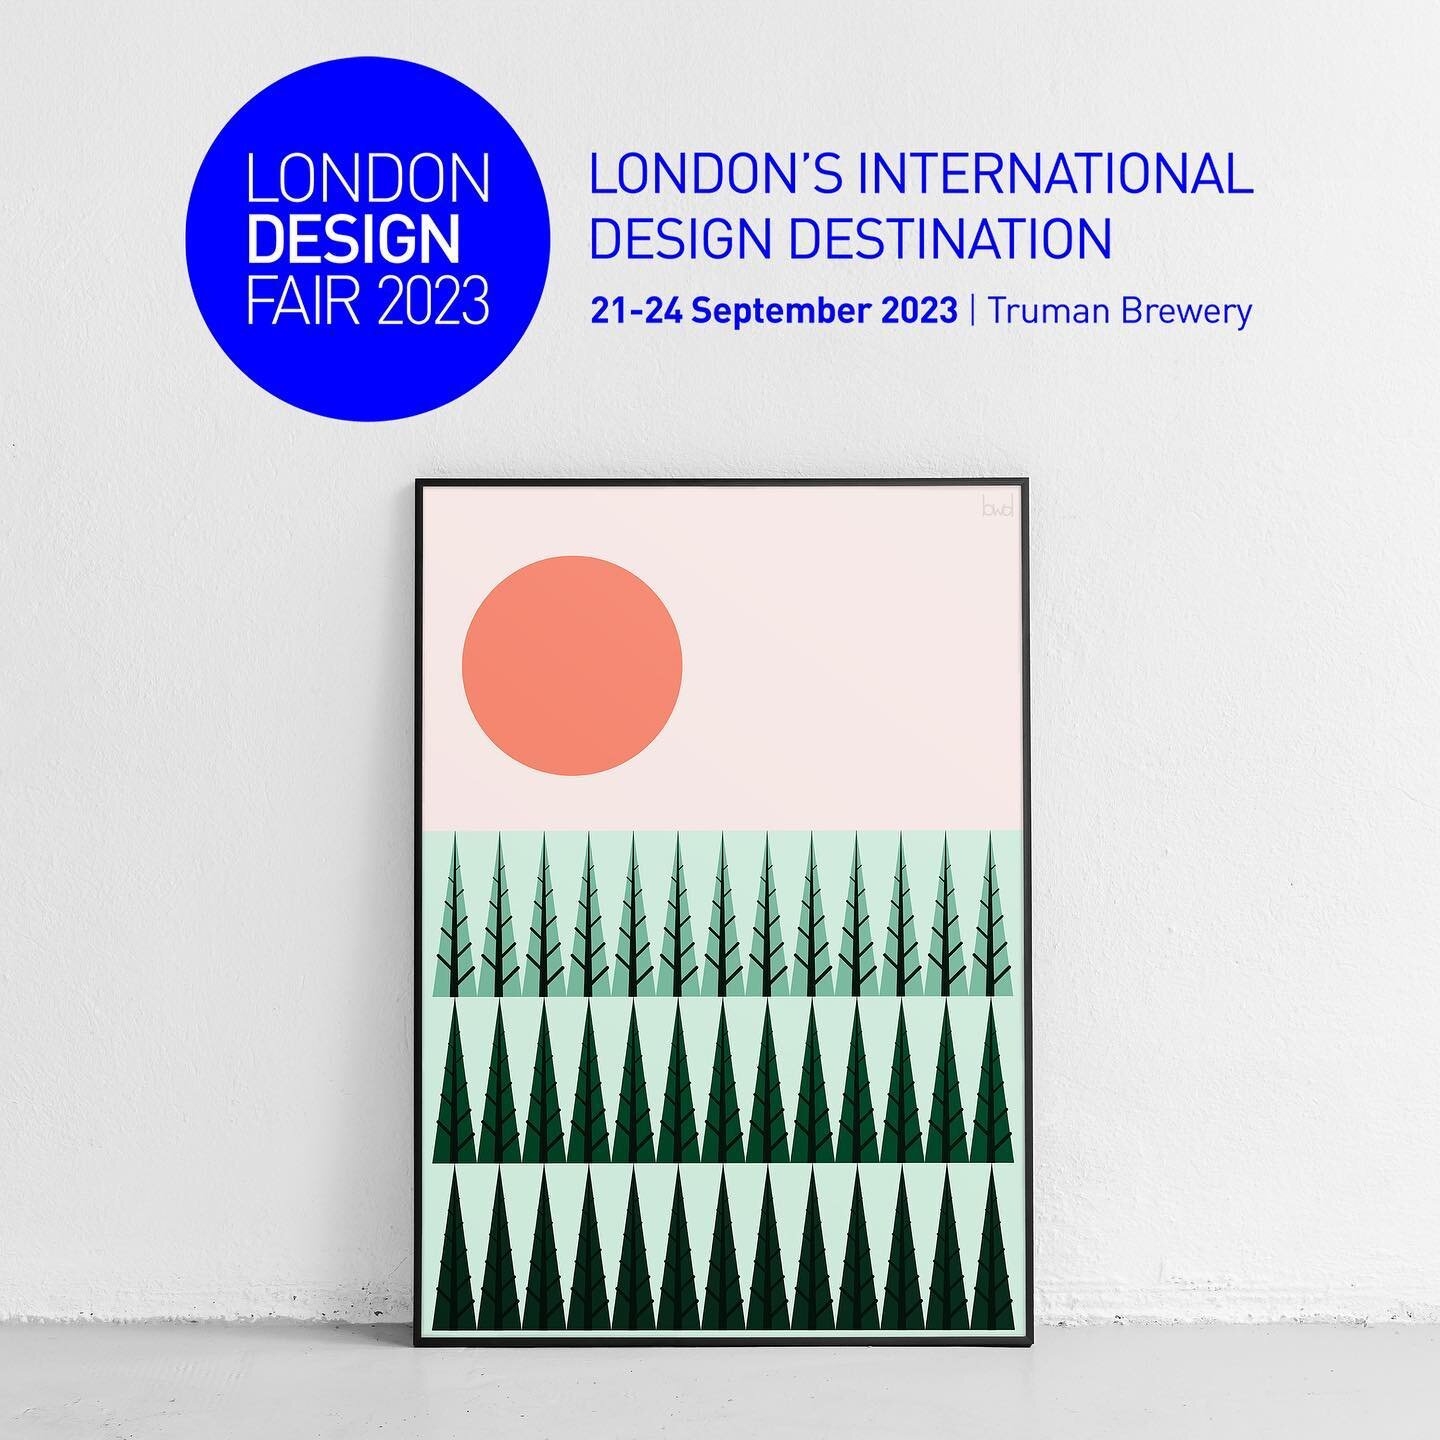 Hello 👋 I&rsquo;m very excited to be exhibiting at @londondesignfair next week!! I&rsquo;ll be at stand 1A45 and there are still tickets available, I&rsquo;d love to see some of you there!!

&hellip;

#londondesignfair #ldndesignfair #design #ldndes